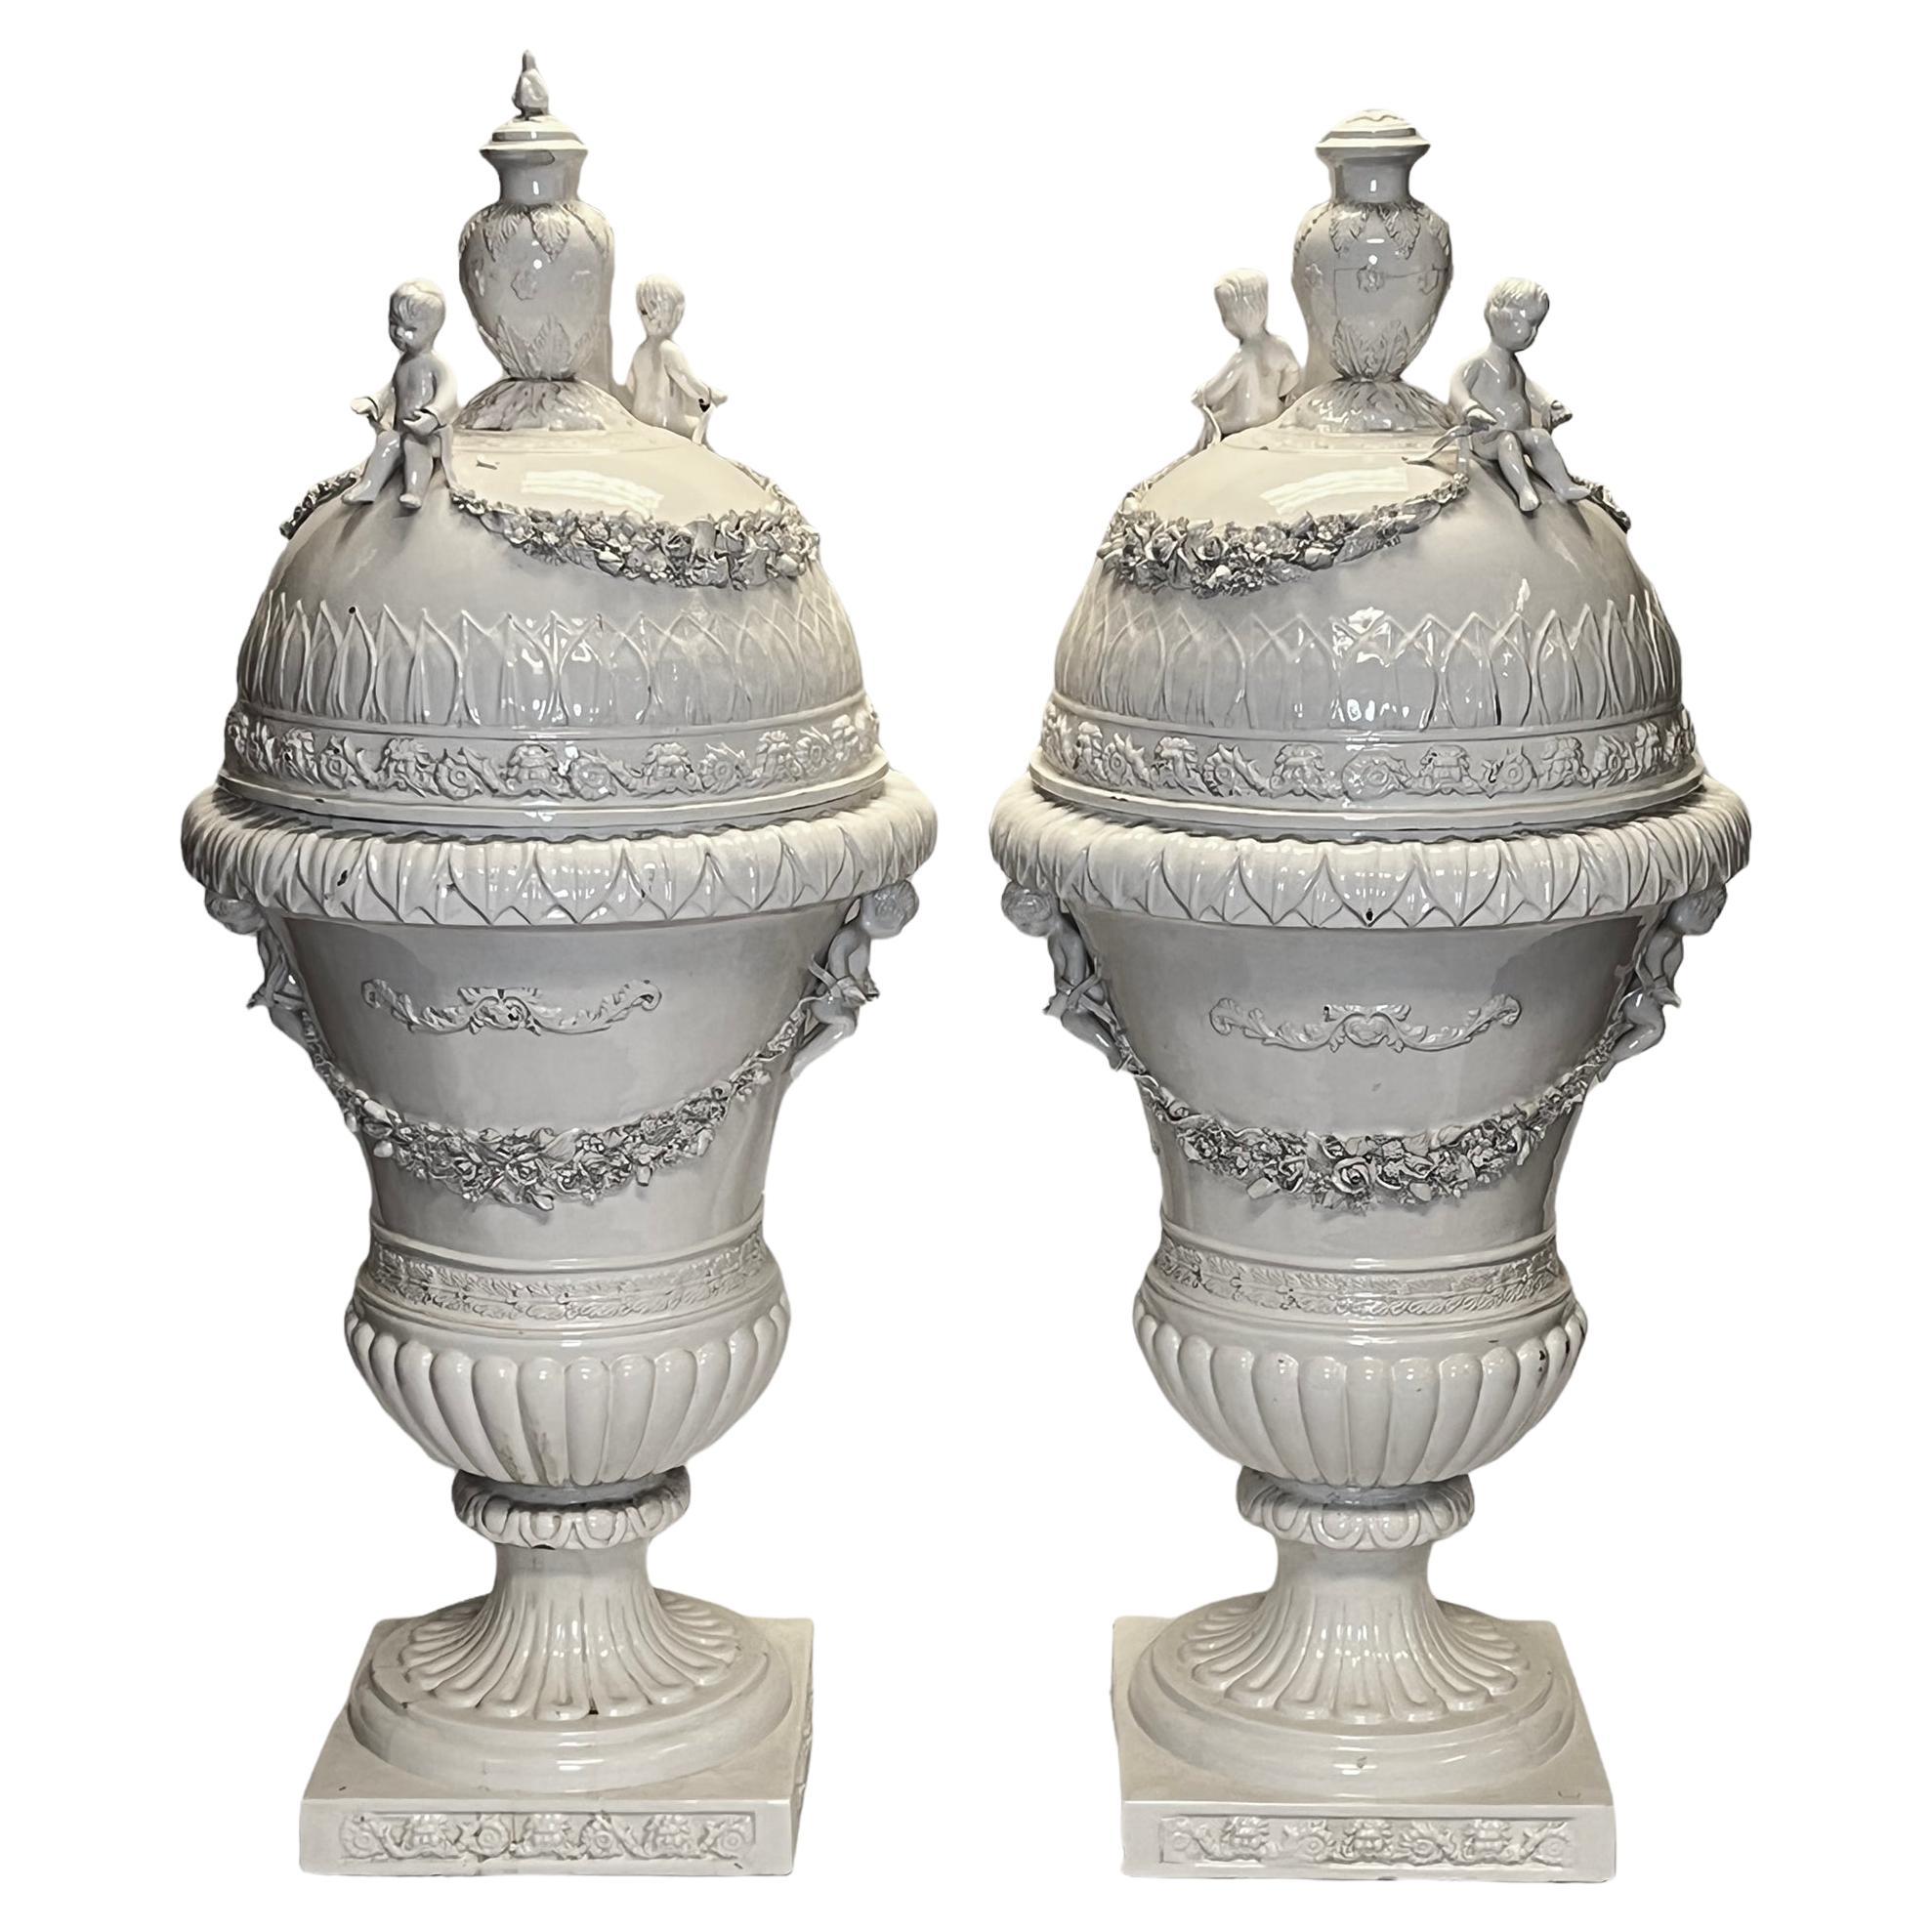 Pair Monumental White Glazed Northern European Floor Vases and Covers